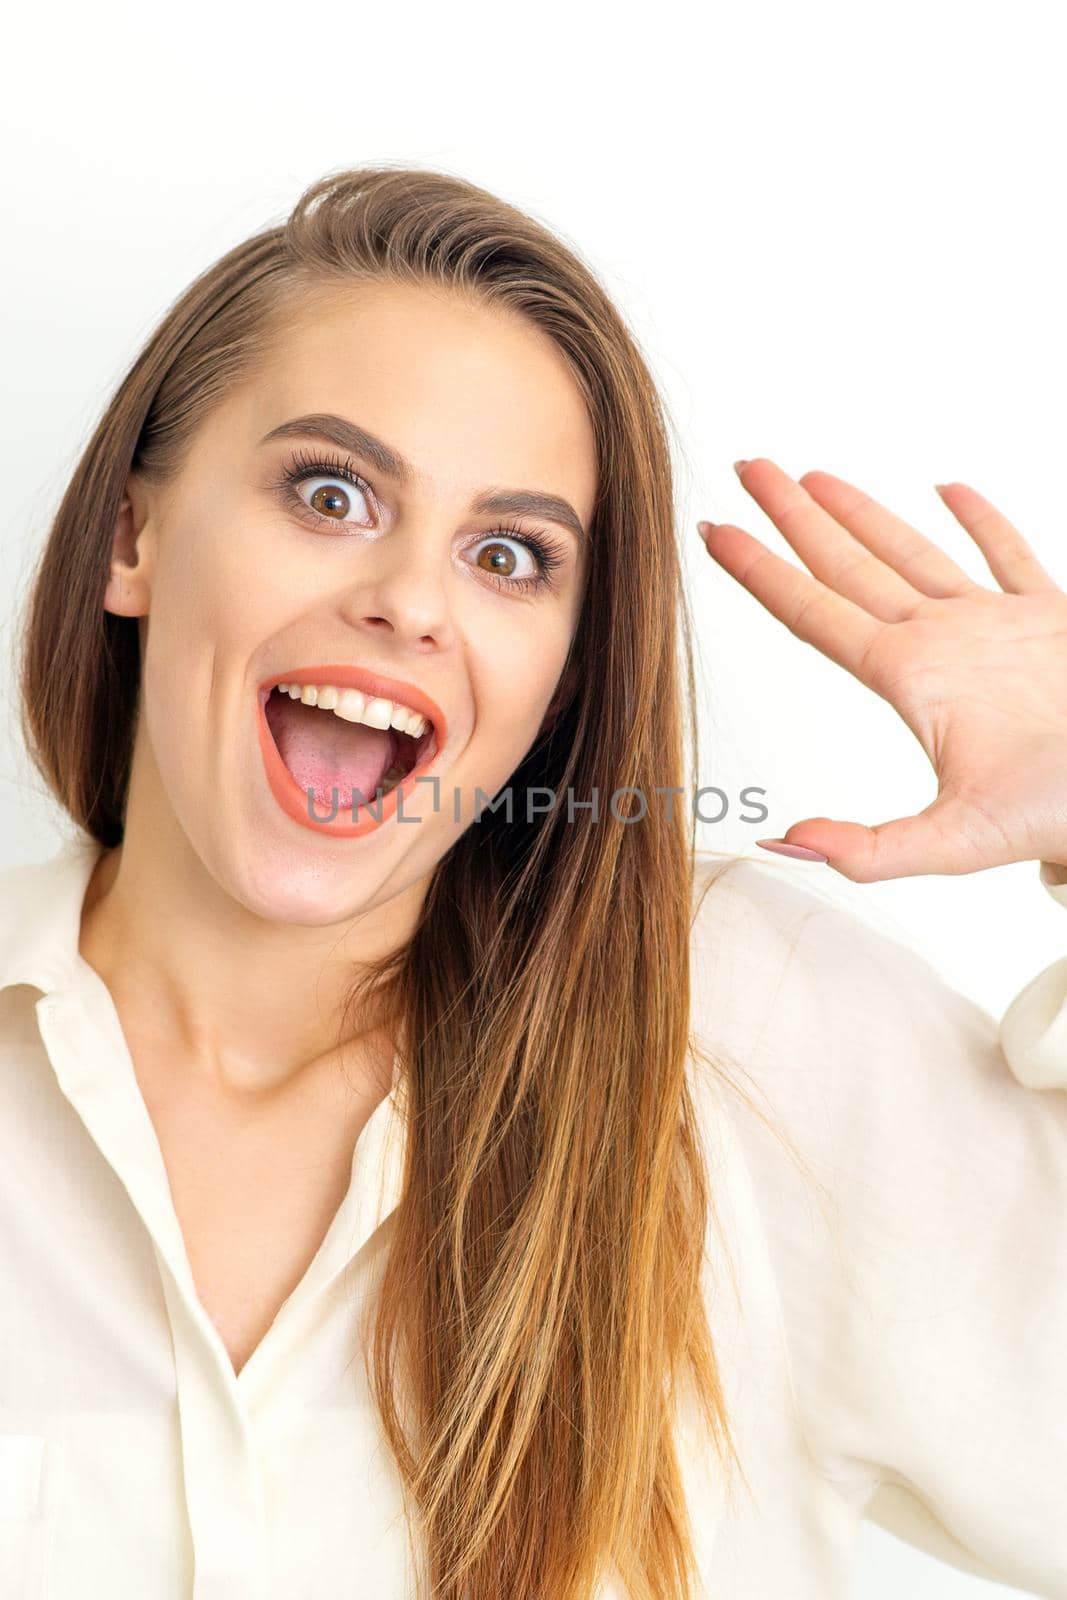 Portrait of young caucasian woman wearing white shirt raises hands and laughs positively with open mouth poses against a white background